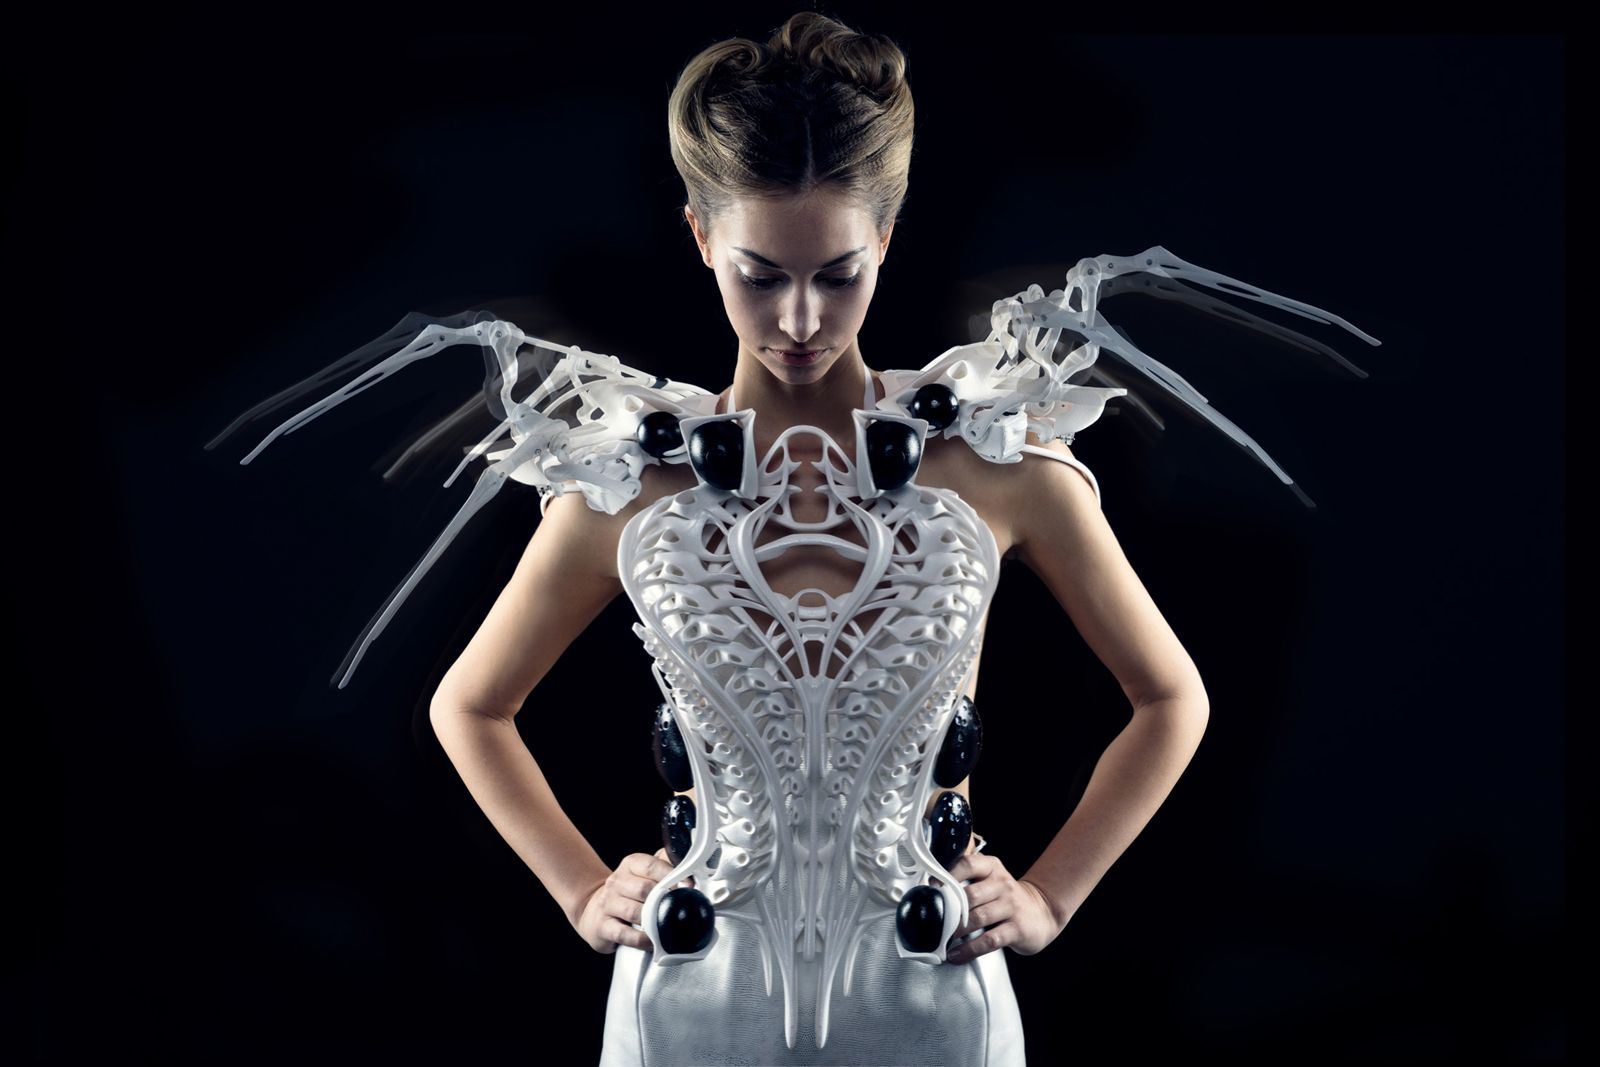 intel smart spider dress is not only scary but it intelligently defends its wearer image 1